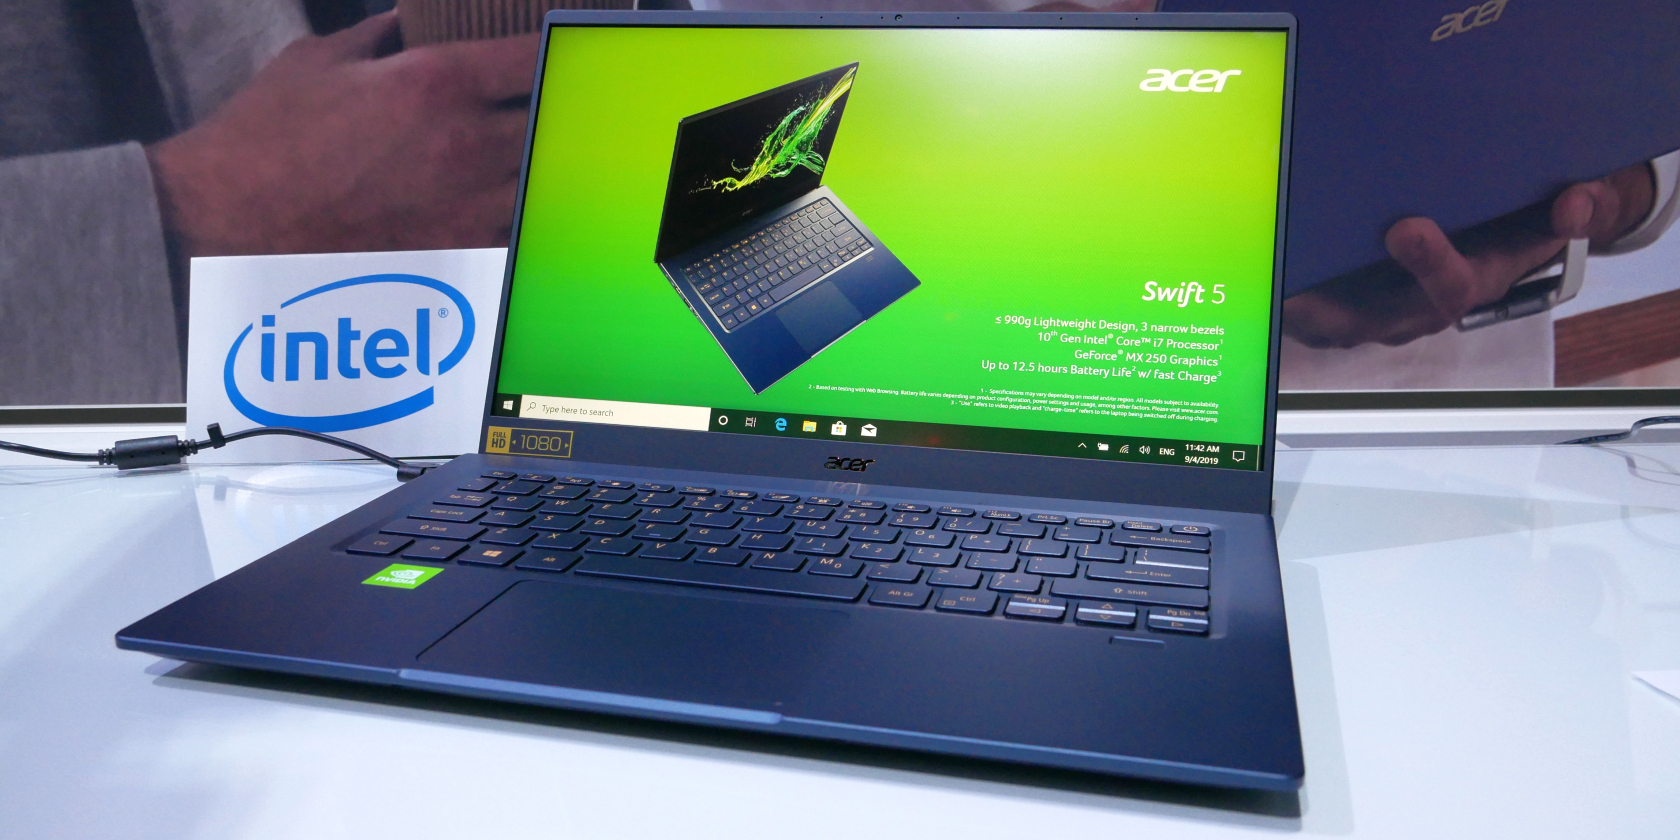 Acer Swift 5 updated model launched at IFA 2019